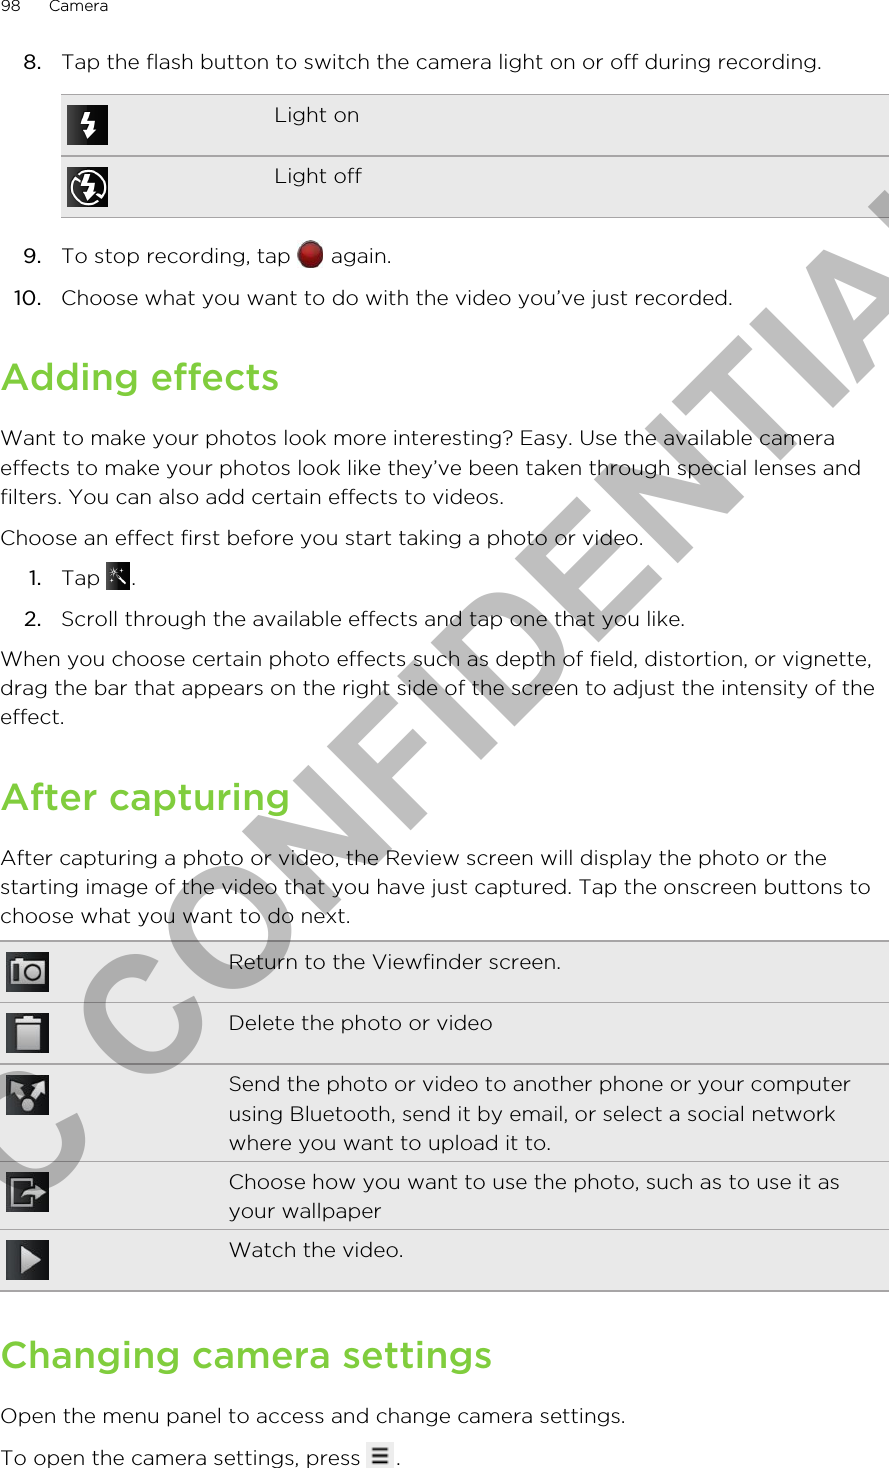 8. Tap the flash button to switch the camera light on or off during recording.Light onLight off9. To stop recording, tap   again.10. Choose what you want to do with the video you’ve just recorded.Adding effectsWant to make your photos look more interesting? Easy. Use the available cameraeffects to make your photos look like they’ve been taken through special lenses andfilters. You can also add certain effects to videos.Choose an effect first before you start taking a photo or video.1. Tap  .2. Scroll through the available effects and tap one that you like.When you choose certain photo effects such as depth of field, distortion, or vignette,drag the bar that appears on the right side of the screen to adjust the intensity of theeffect.After capturingAfter capturing a photo or video, the Review screen will display the photo or thestarting image of the video that you have just captured. Tap the onscreen buttons tochoose what you want to do next.Return to the Viewfinder screen.Delete the photo or videoSend the photo or video to another phone or your computerusing Bluetooth, send it by email, or select a social networkwhere you want to upload it to.Choose how you want to use the photo, such as to use it asyour wallpaperWatch the video.Changing camera settingsOpen the menu panel to access and change camera settings.To open the camera settings, press  . 98 CameraHTC CONFIDENTIAL